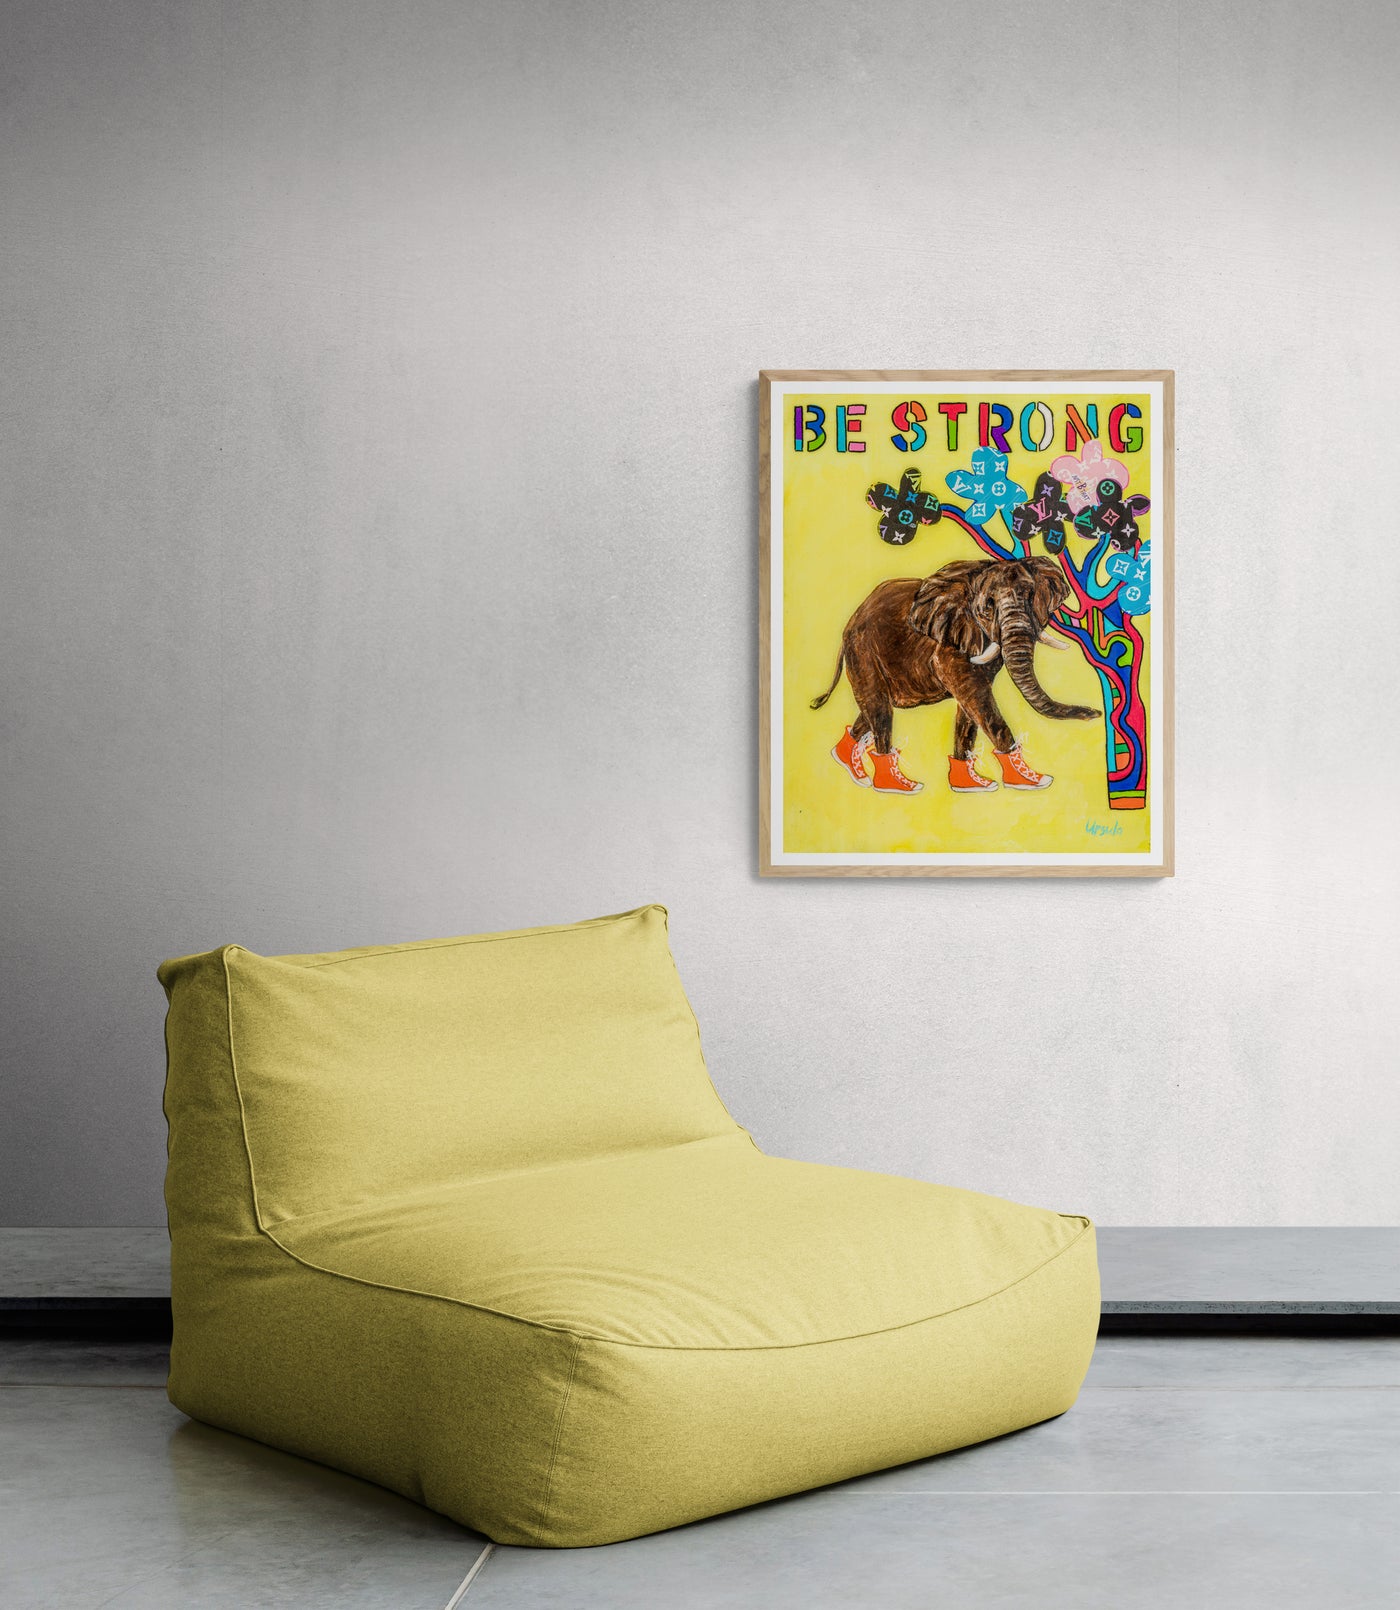 ART PRINT - THE YELLOW ELEPHANT LEADS THE WAY